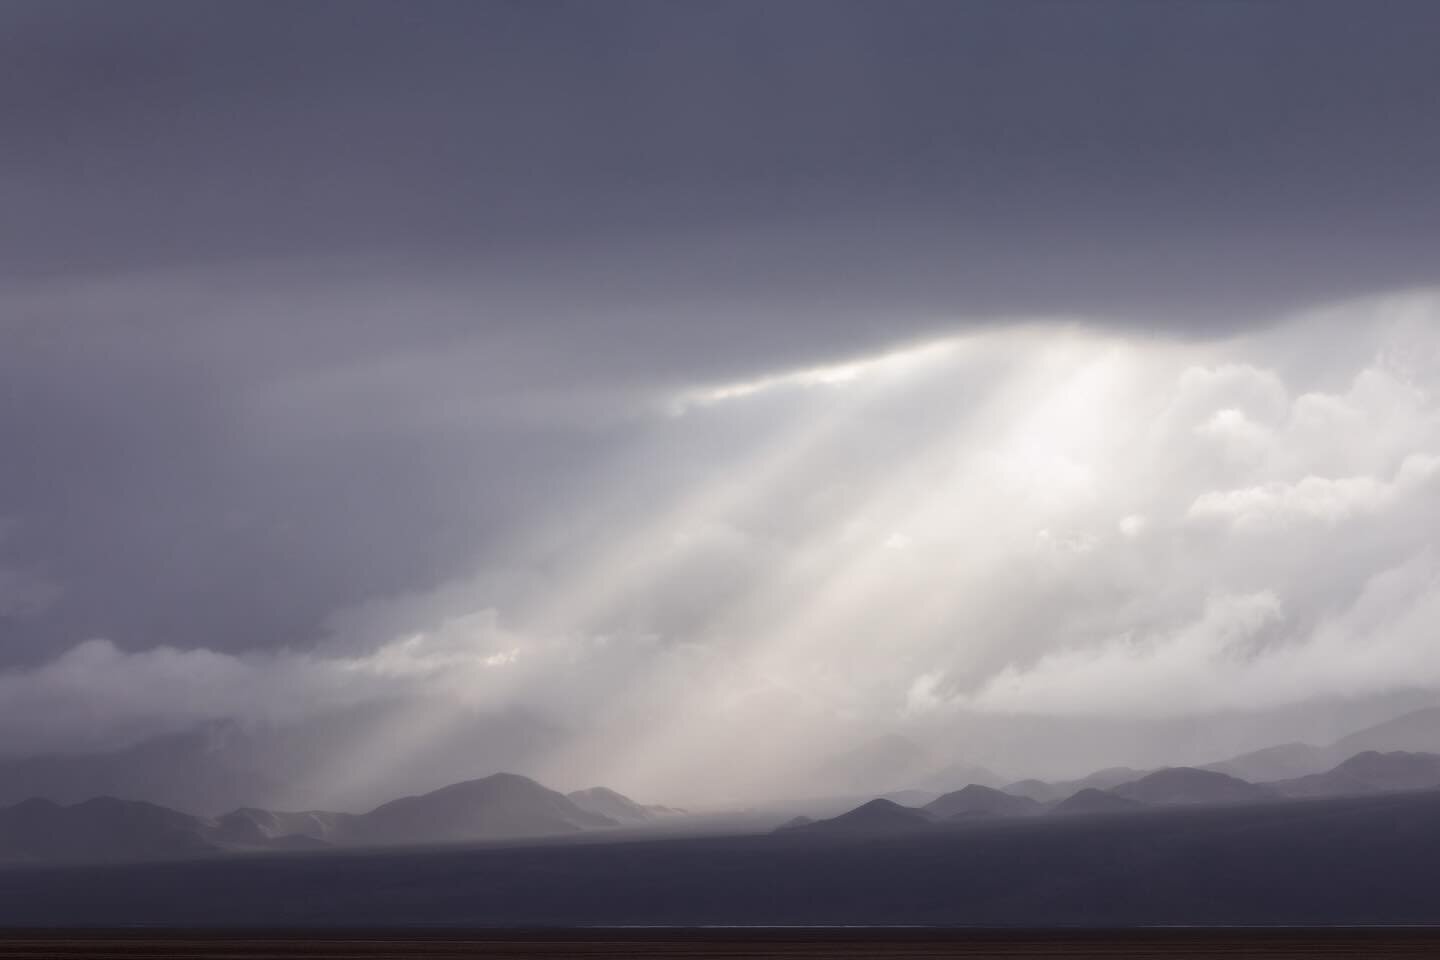 Some lovely sun beams in Death Valley, shining through very heavy storm clouds to illuminate the Panamint Mountains. I just shared a new blog post, my January month in review. I talk about our recent trip to Death Valley, why we keep revisiting the p